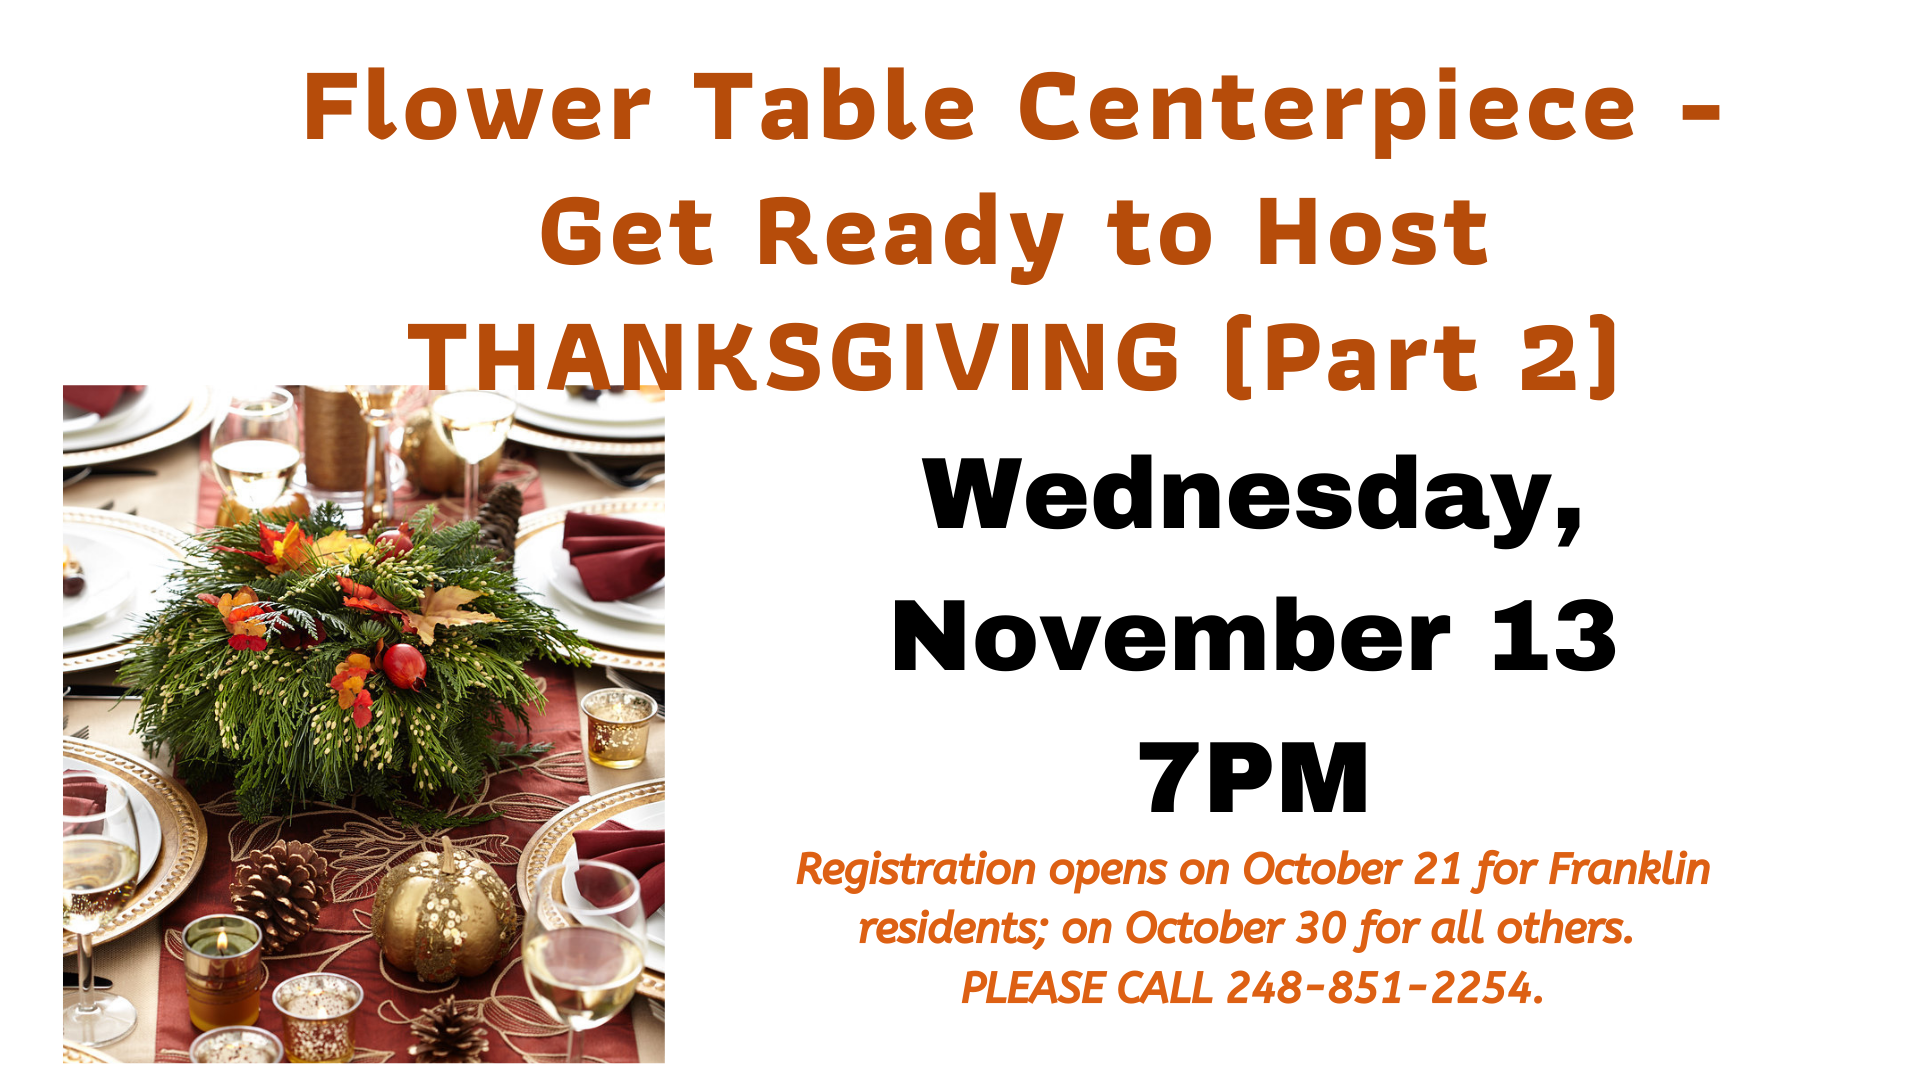 CAROUSEL Table Centerpiece for Thanksgiving 11.13.19.png